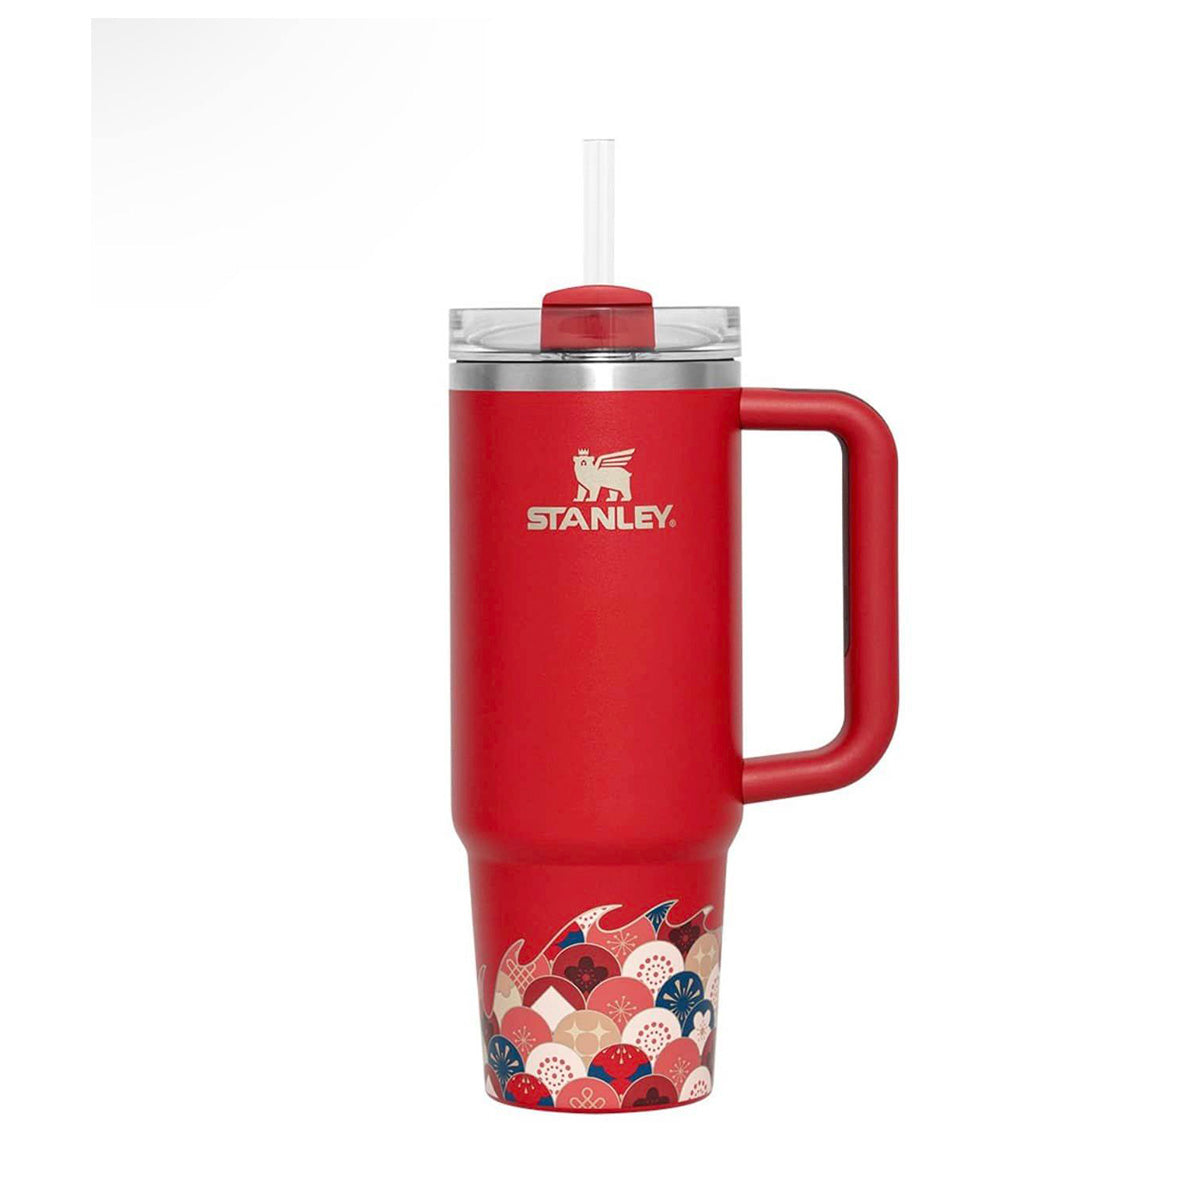 Stanley dragon red color limited stainless steel cup 30oz